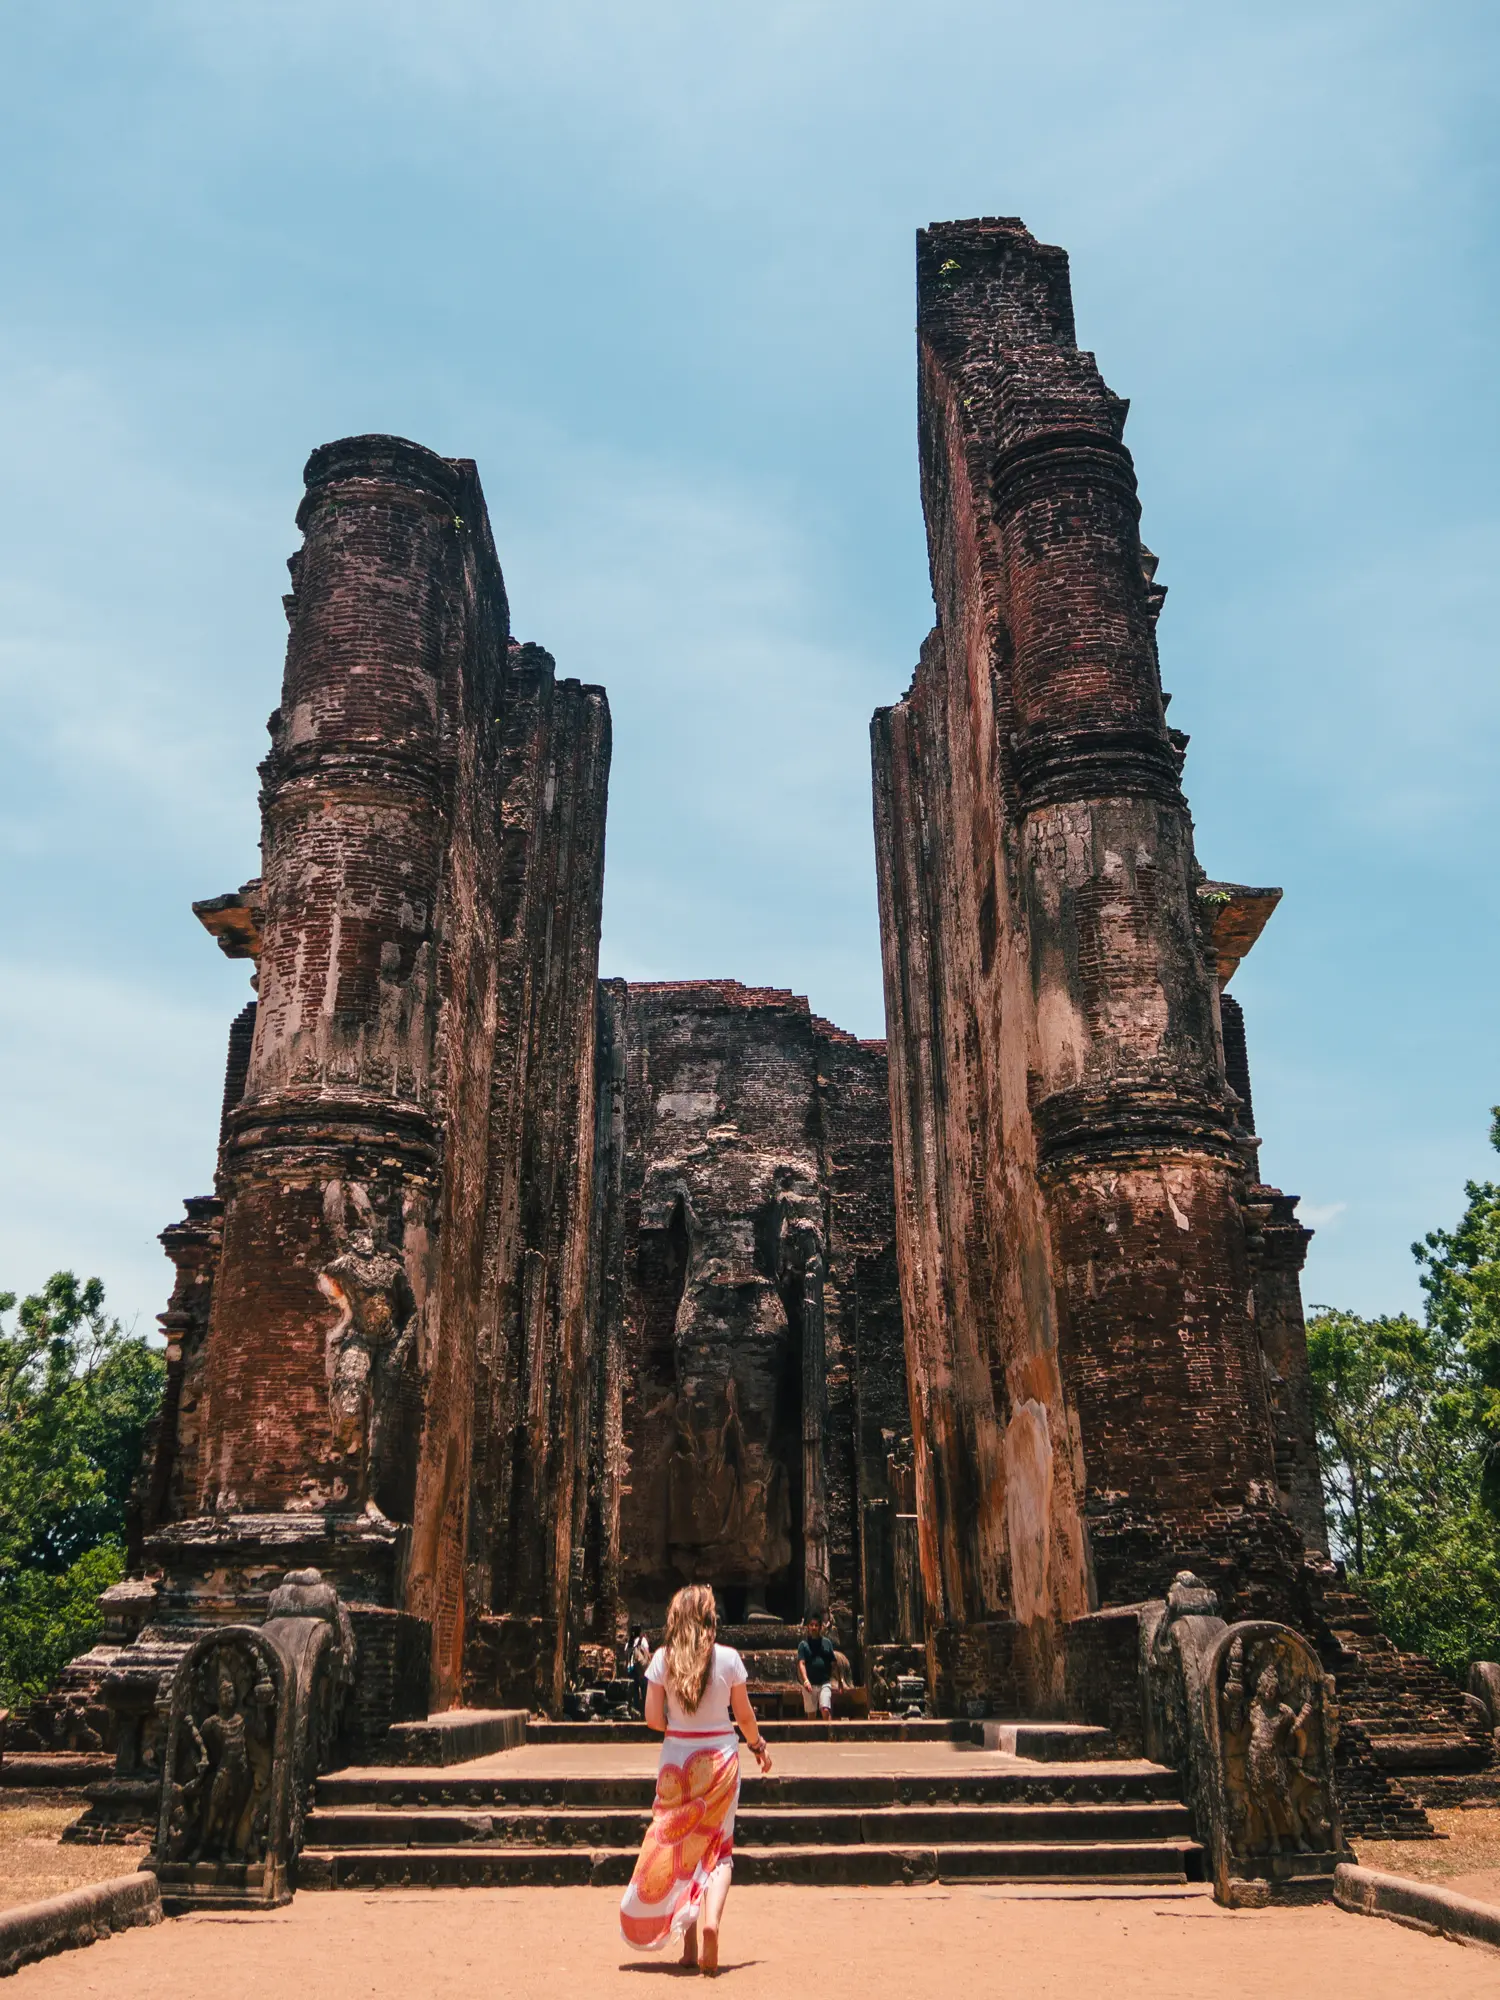 Girl with long hair, wearing a white, orange and yellow sarong, walking towards two tall brick walls with a Buddha statue in the middle, at Lankatilaka in Polonnaruwa.